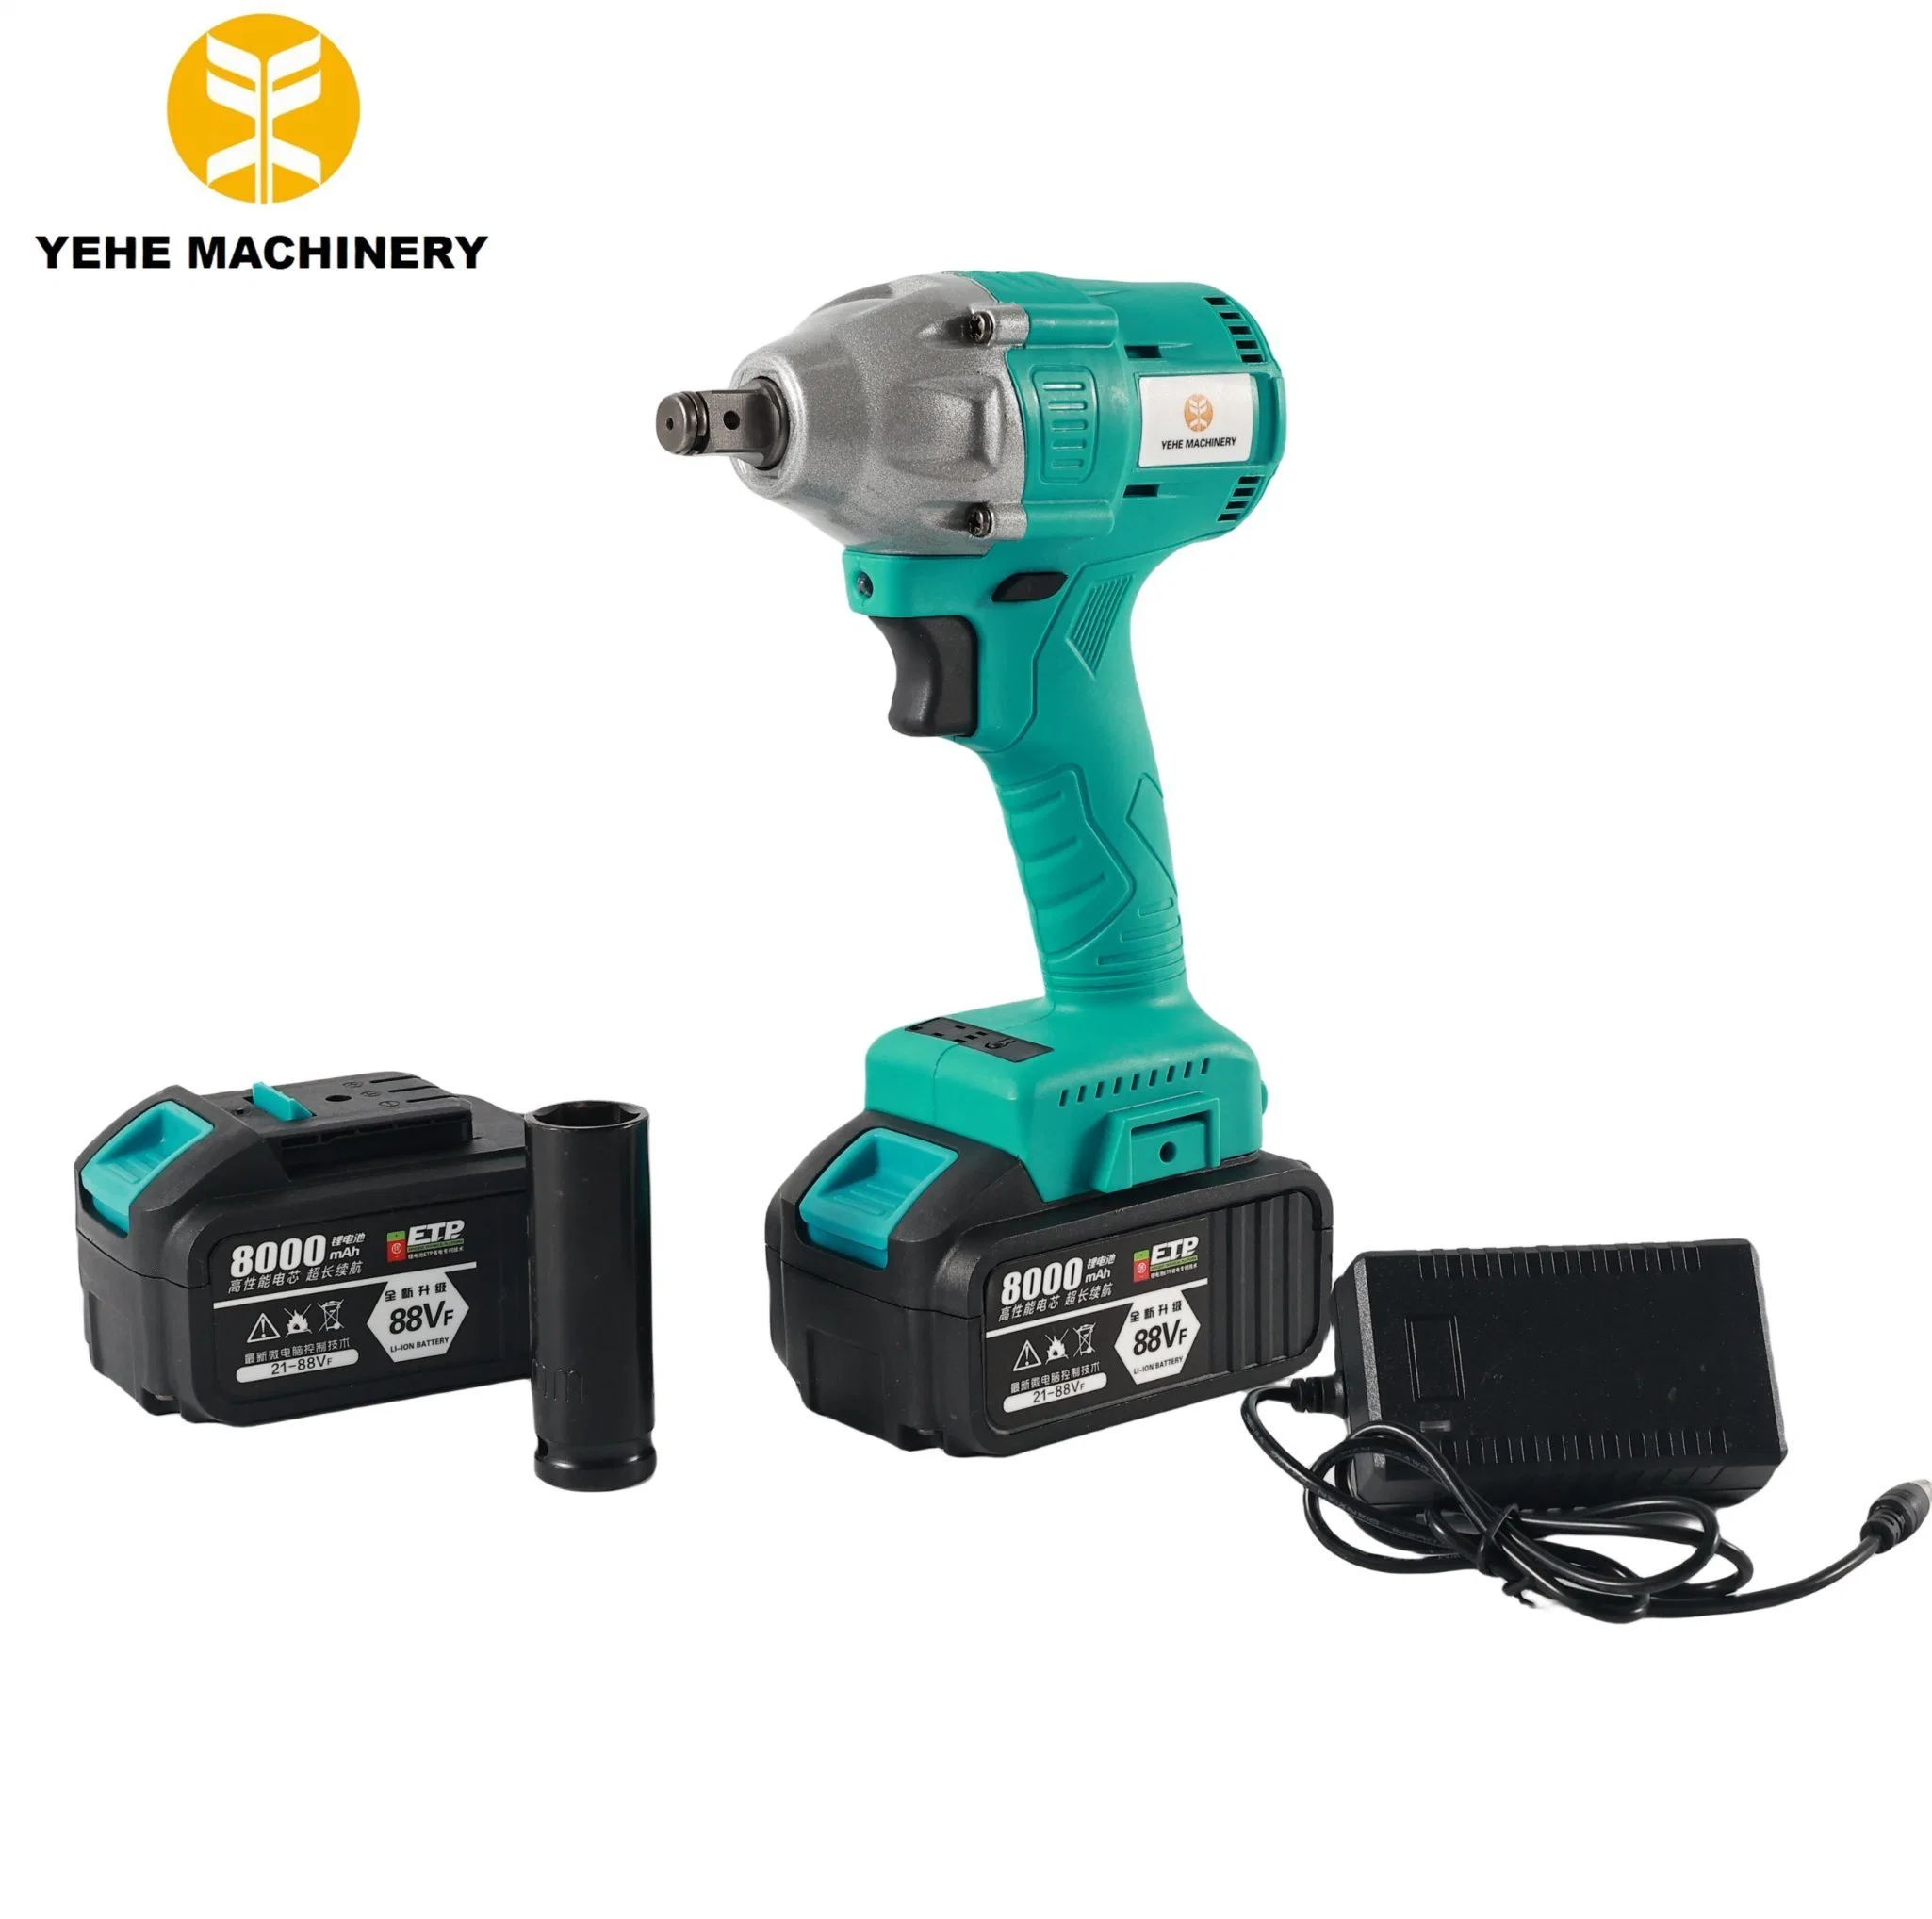 18V/20V High Torque Brushless Cordless Power Industrial Lithium Battery Adjustable Hand Tool Cordless Automotive Repair Air Impact Wrench